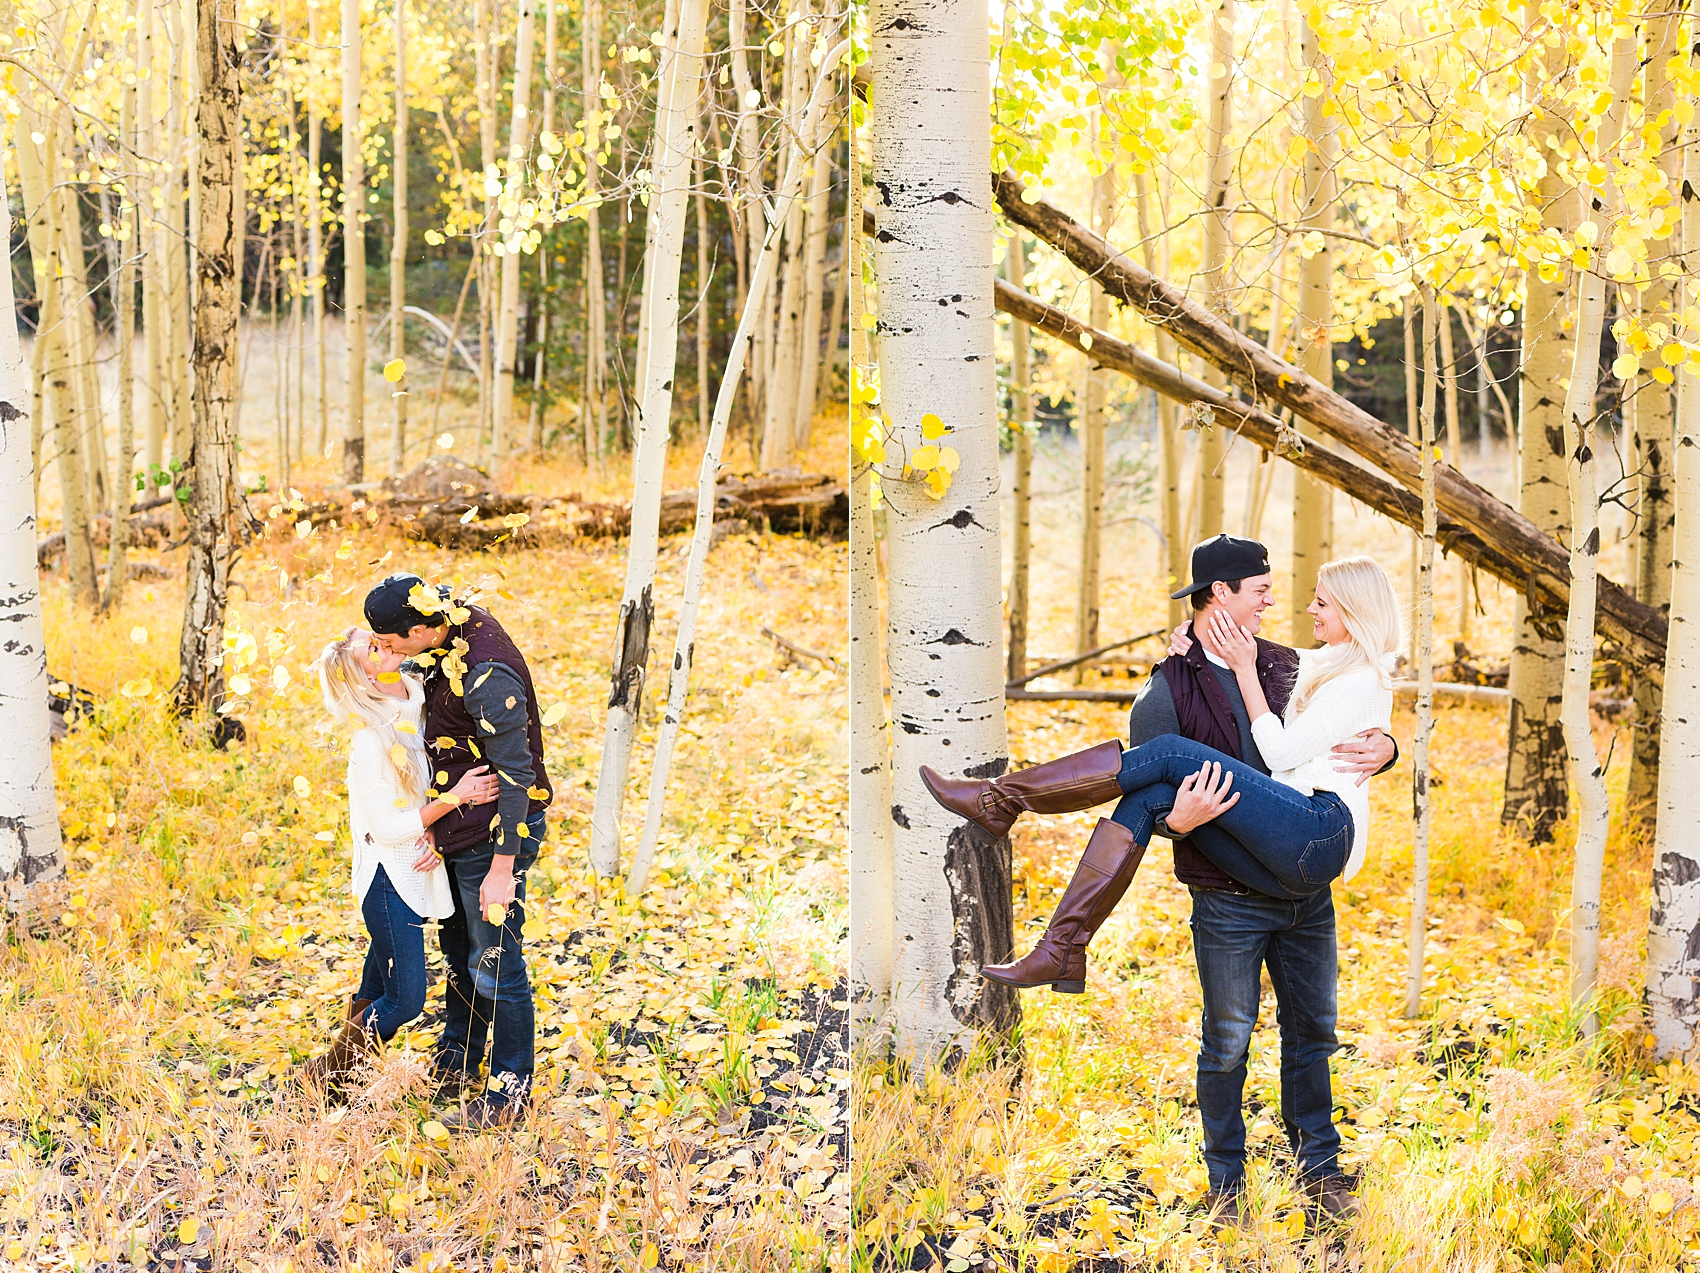 Leah Hope Photography | Flagstaff Arizona | Aspen Corner | Fall Yellow Aspen Leaves | Engagement Pictures | What to Wear | Couples Poses | In Love | Engaged